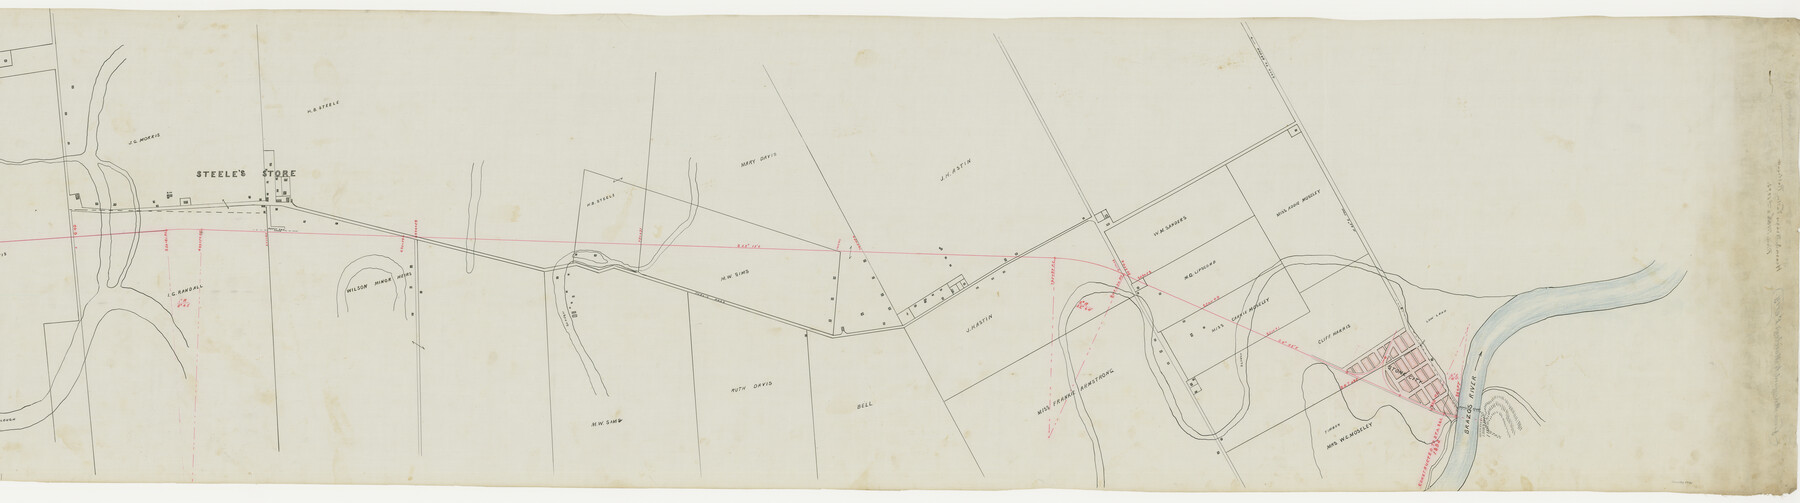 64401, [Map of the Hearne and Brazos Valley Railroad from Mumford to Moseley's Ferry], General Map Collection